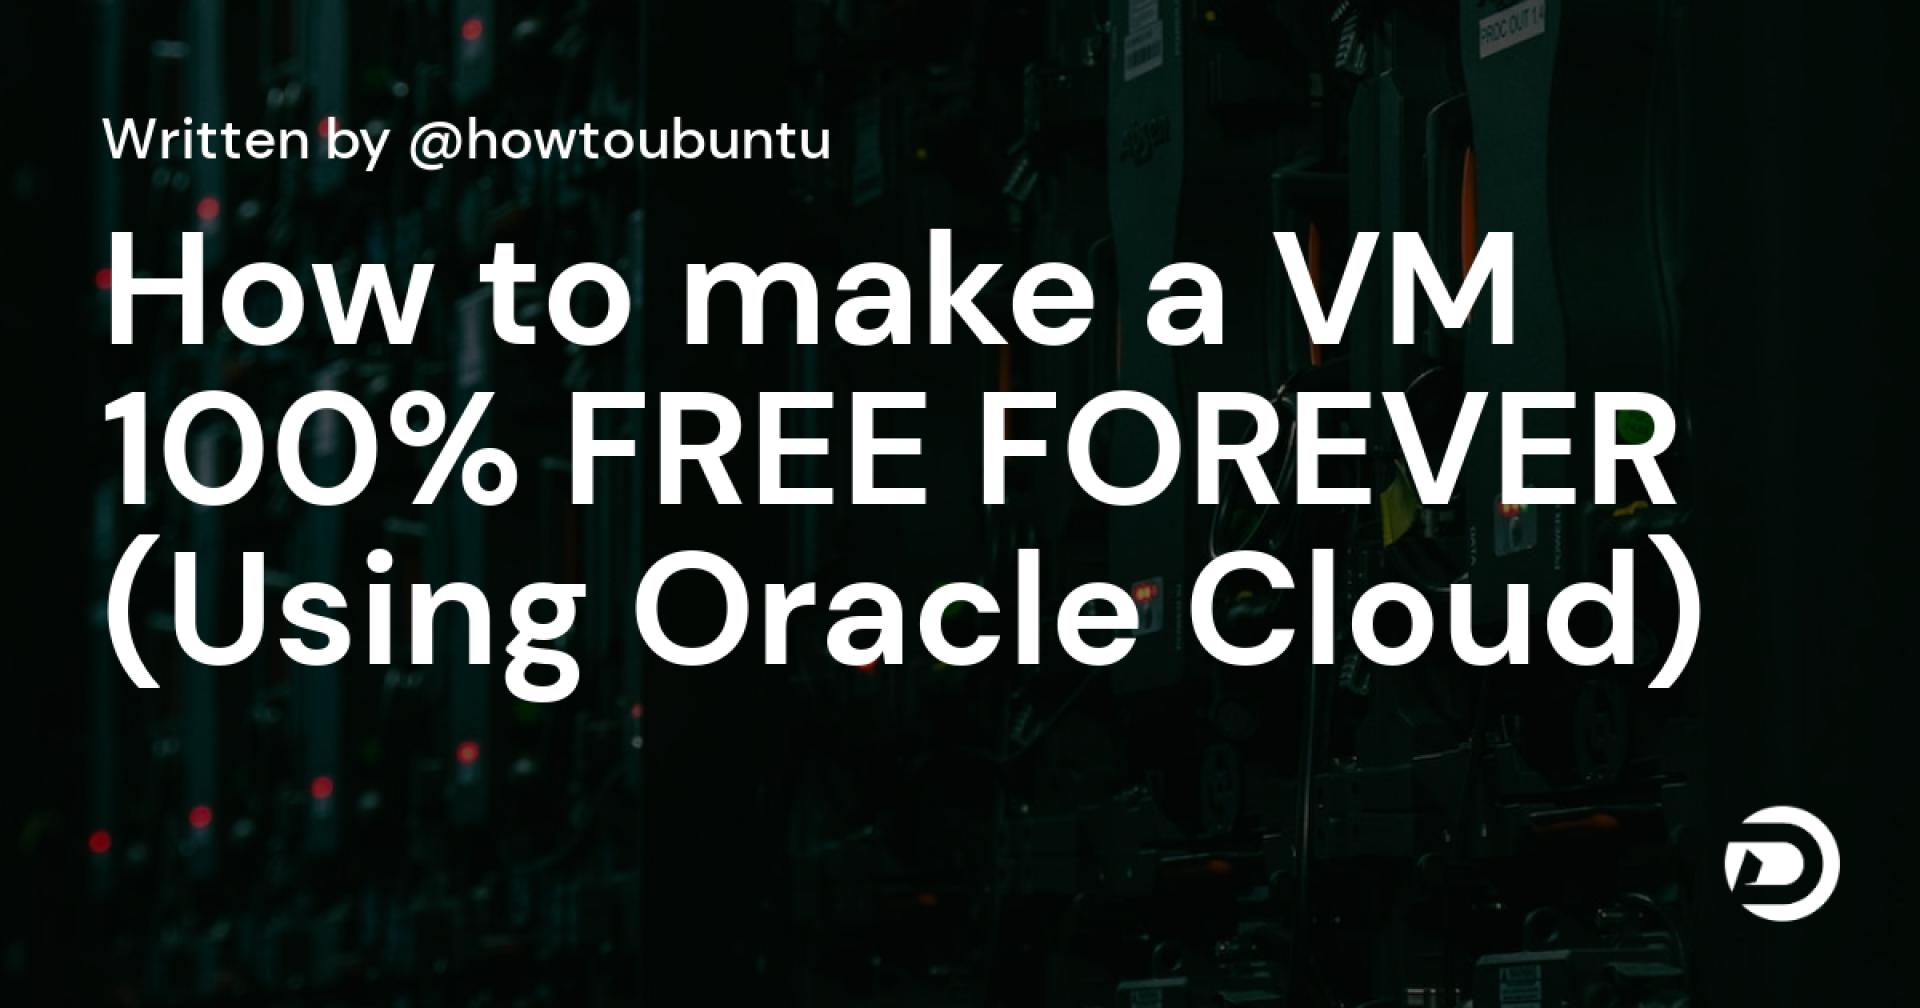 How to make a VM 100% FREE FOREVER (Using Oracle Cloud)